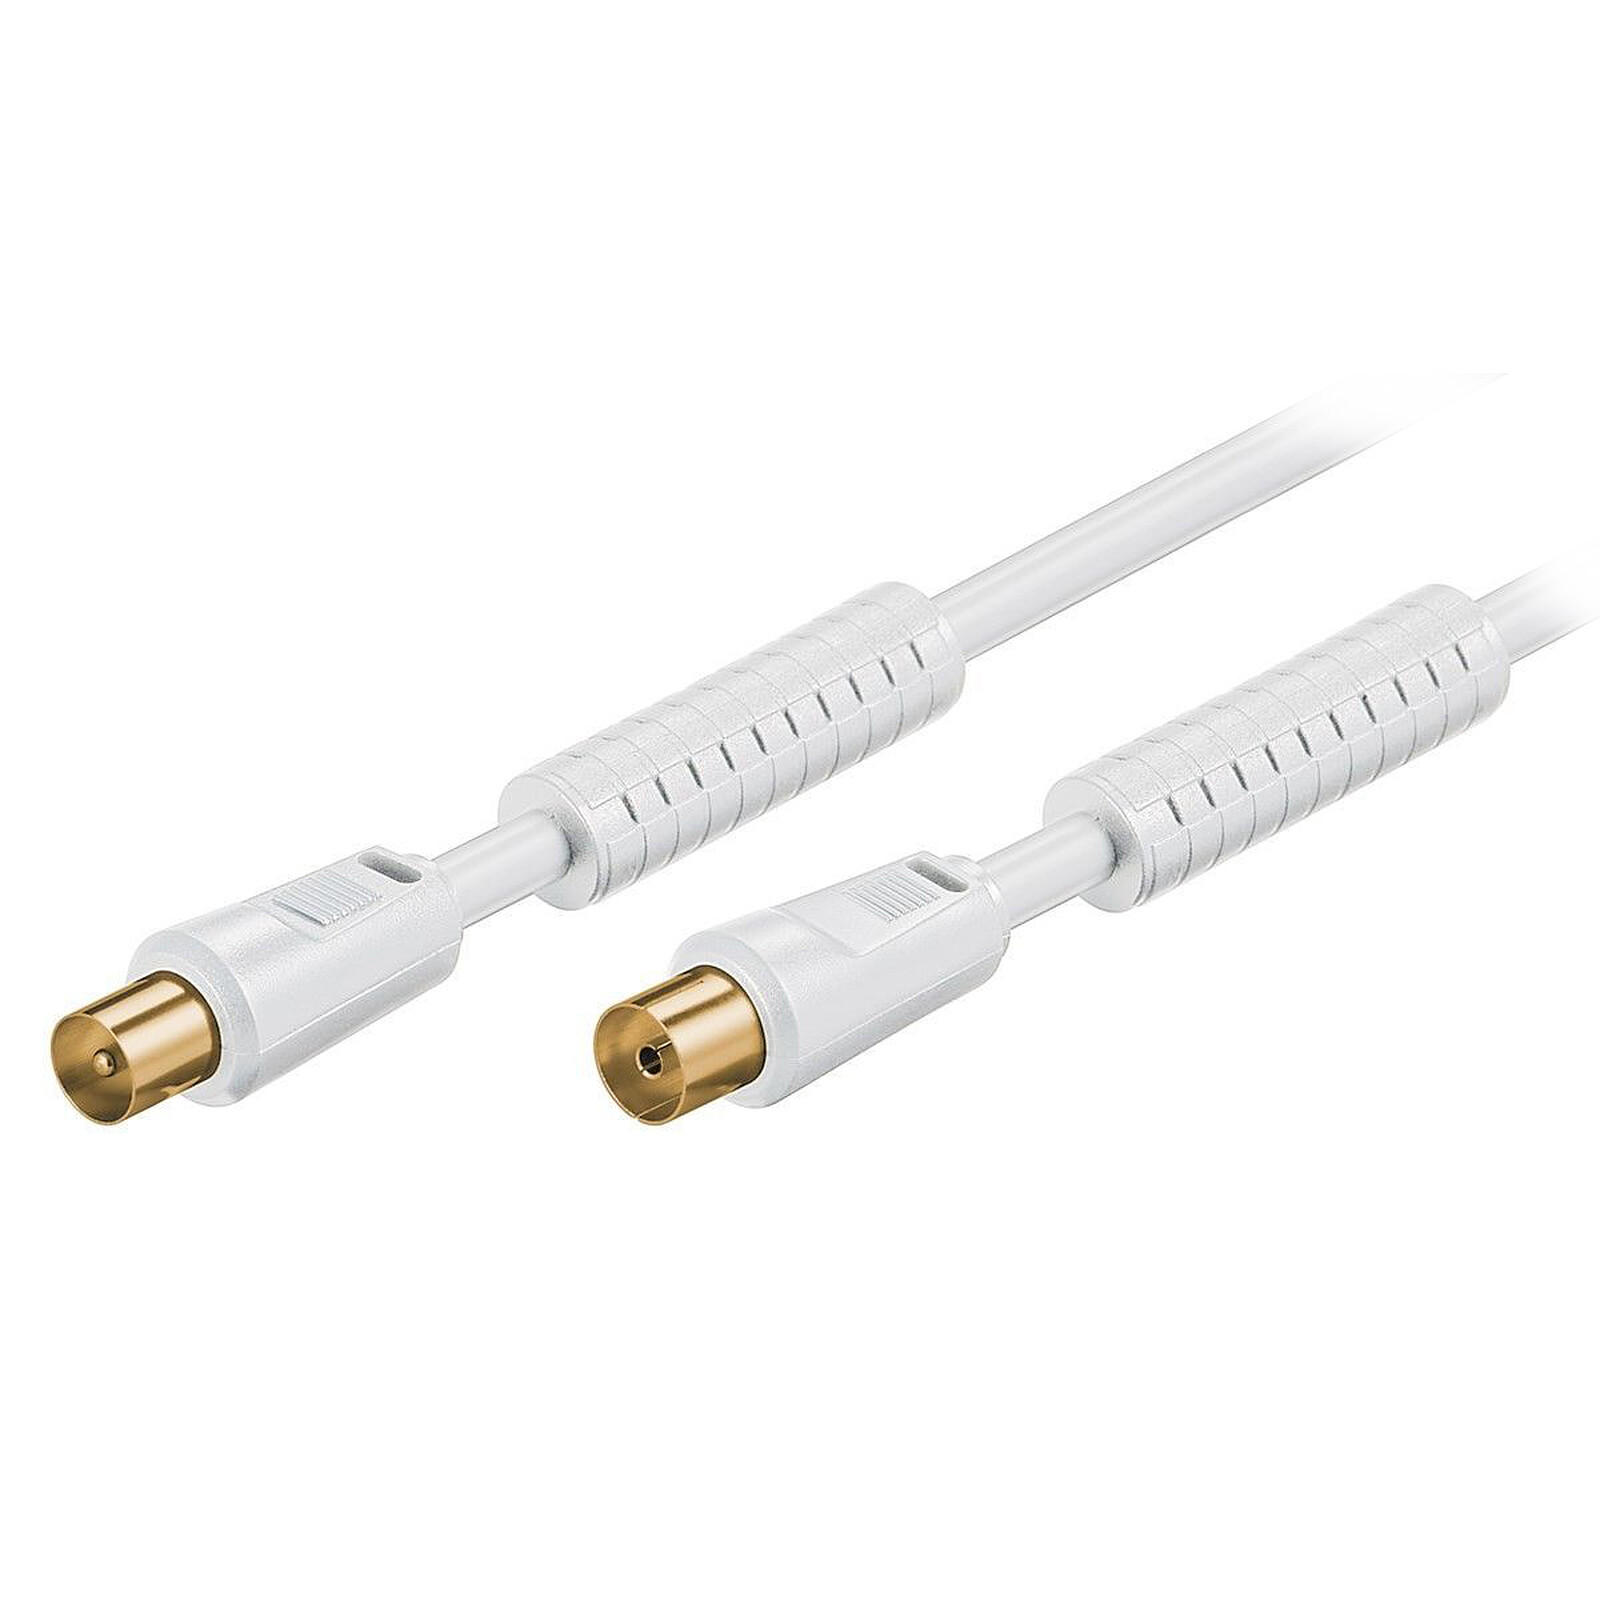 Coaxial Antenna Cable Coax SAT LNB "Ave-a" Male: Amazon.co.uk: Electronics